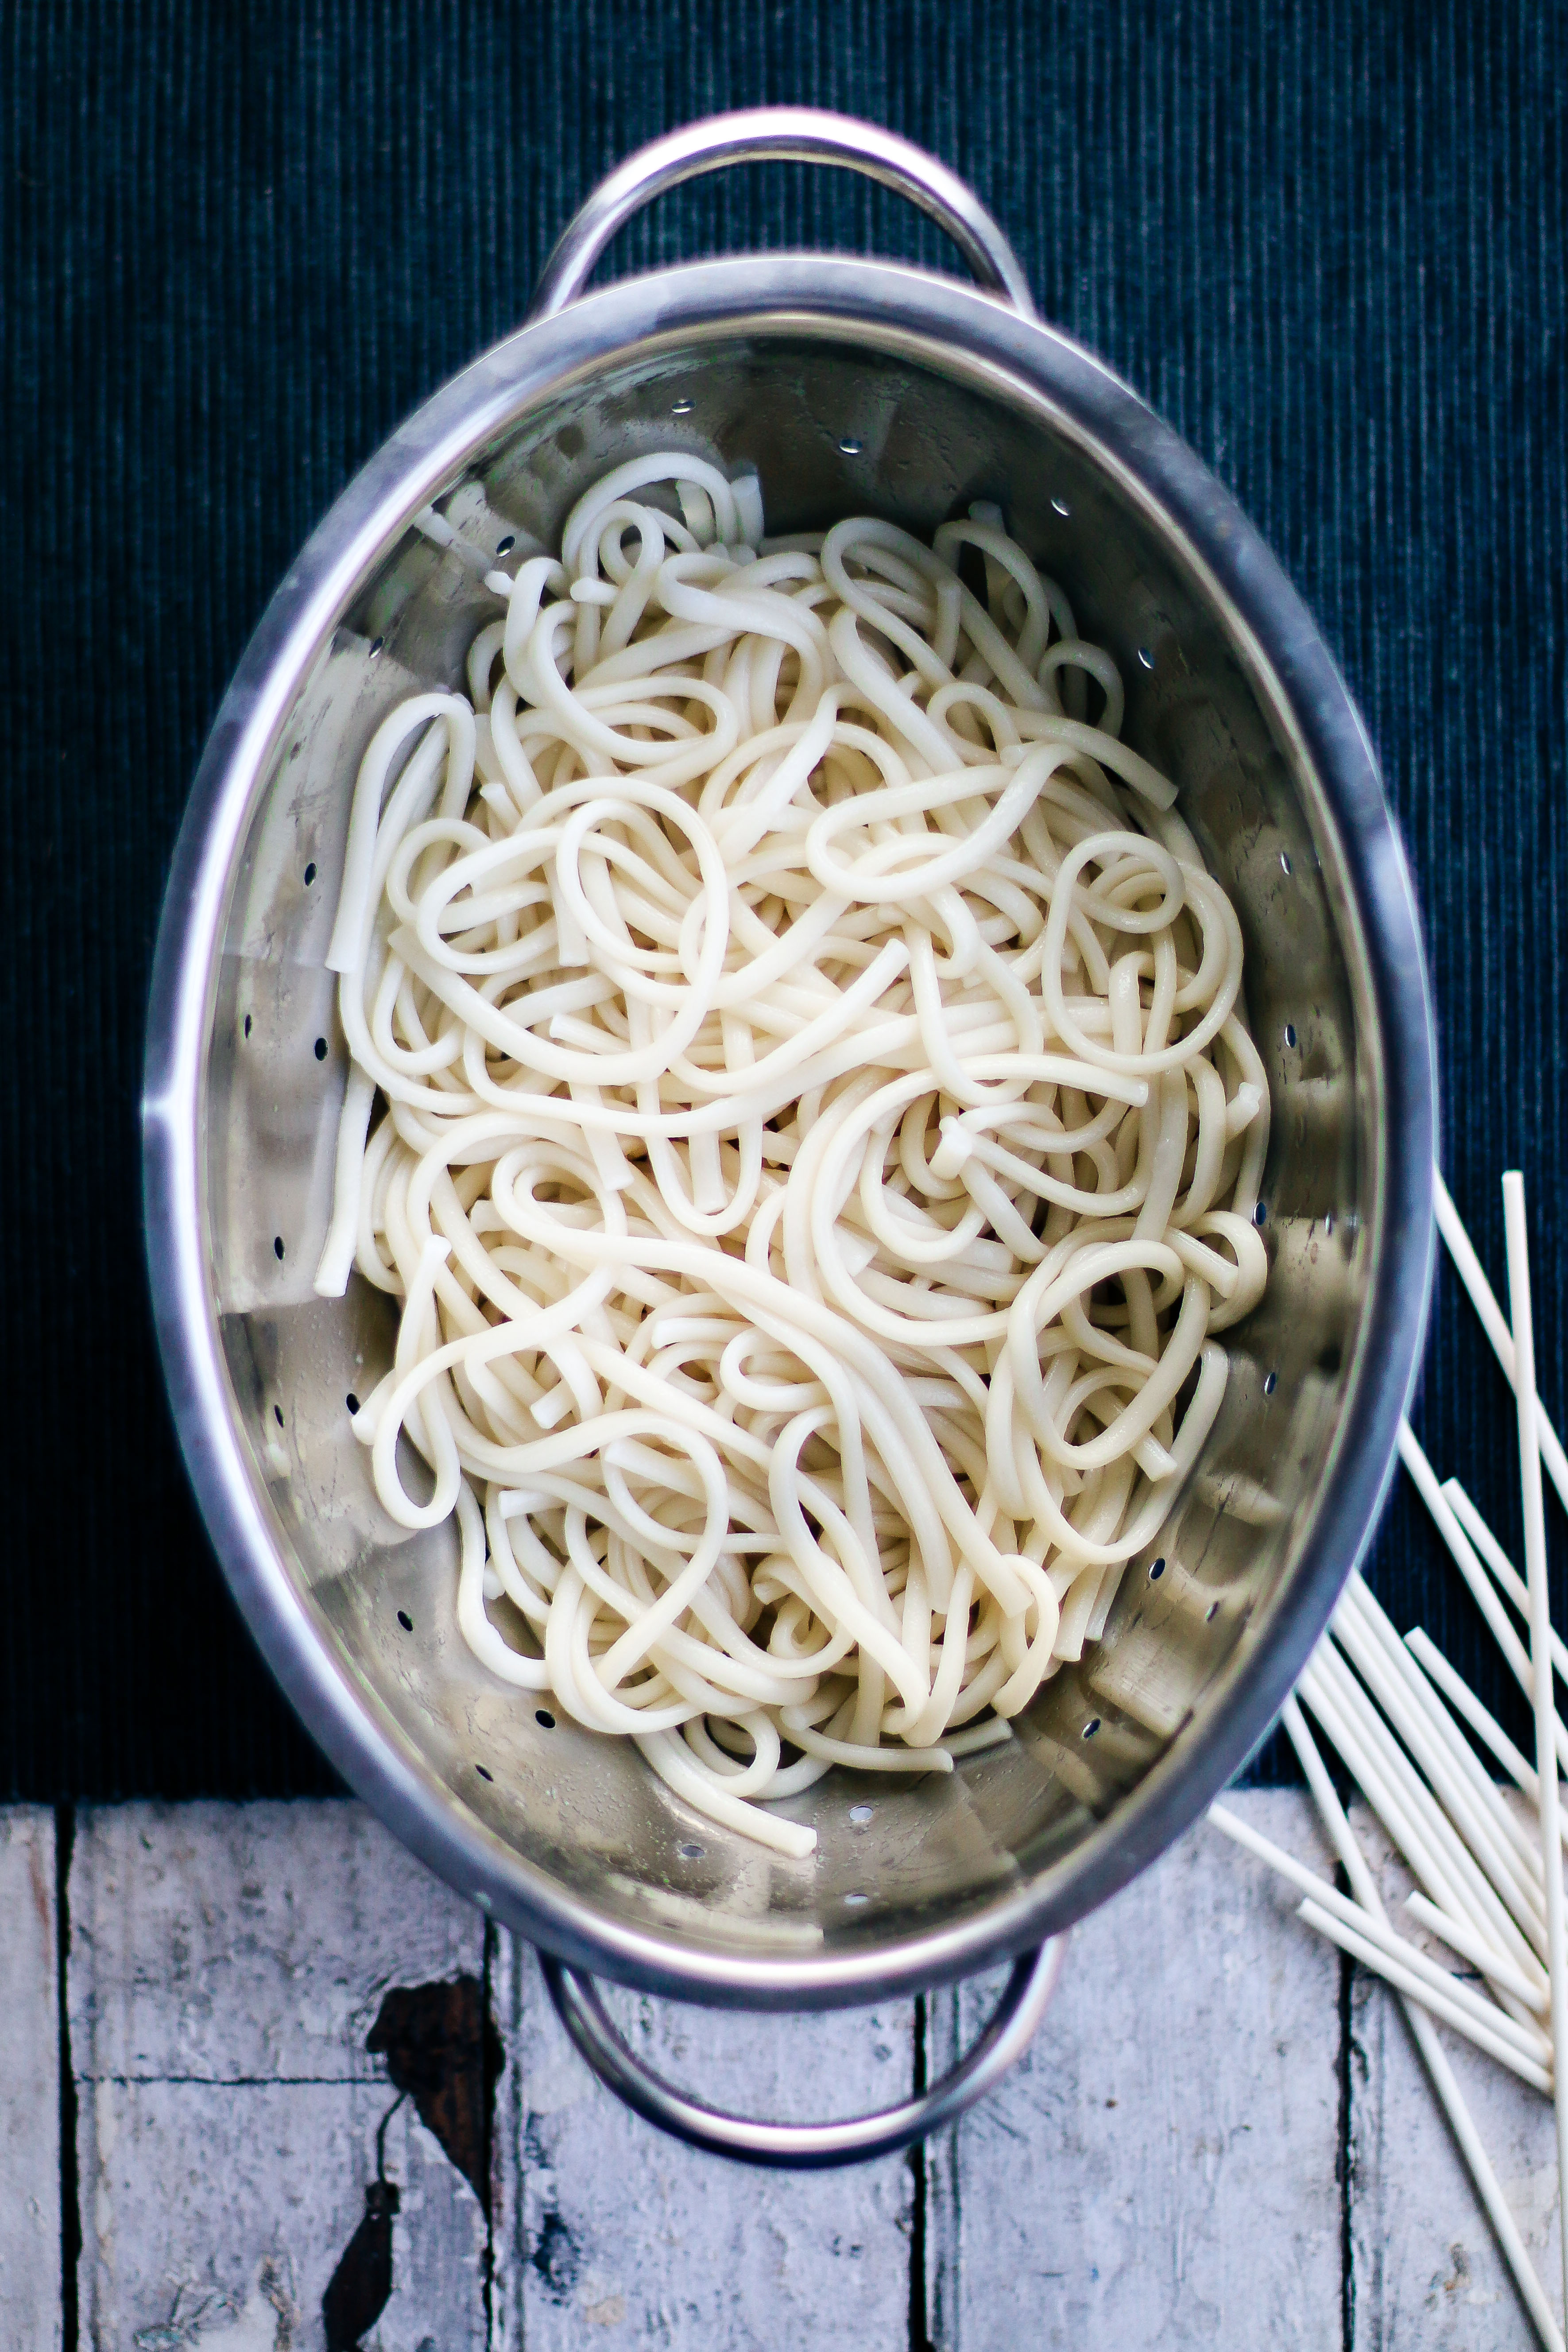 Tahini Udon Noodles with Roasted Eggplants | Japan meets Middle East | I Wi